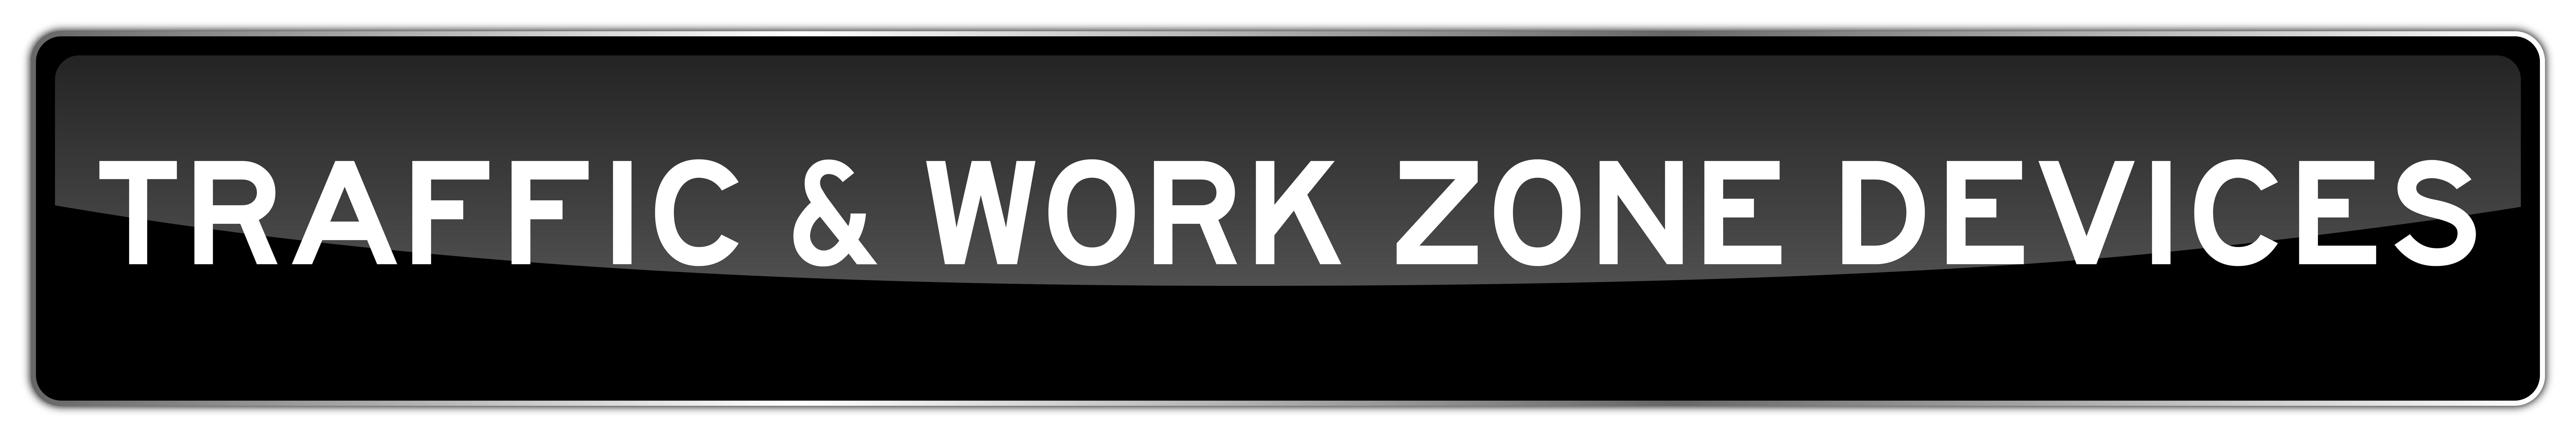 Traffic & Work Zone Devices